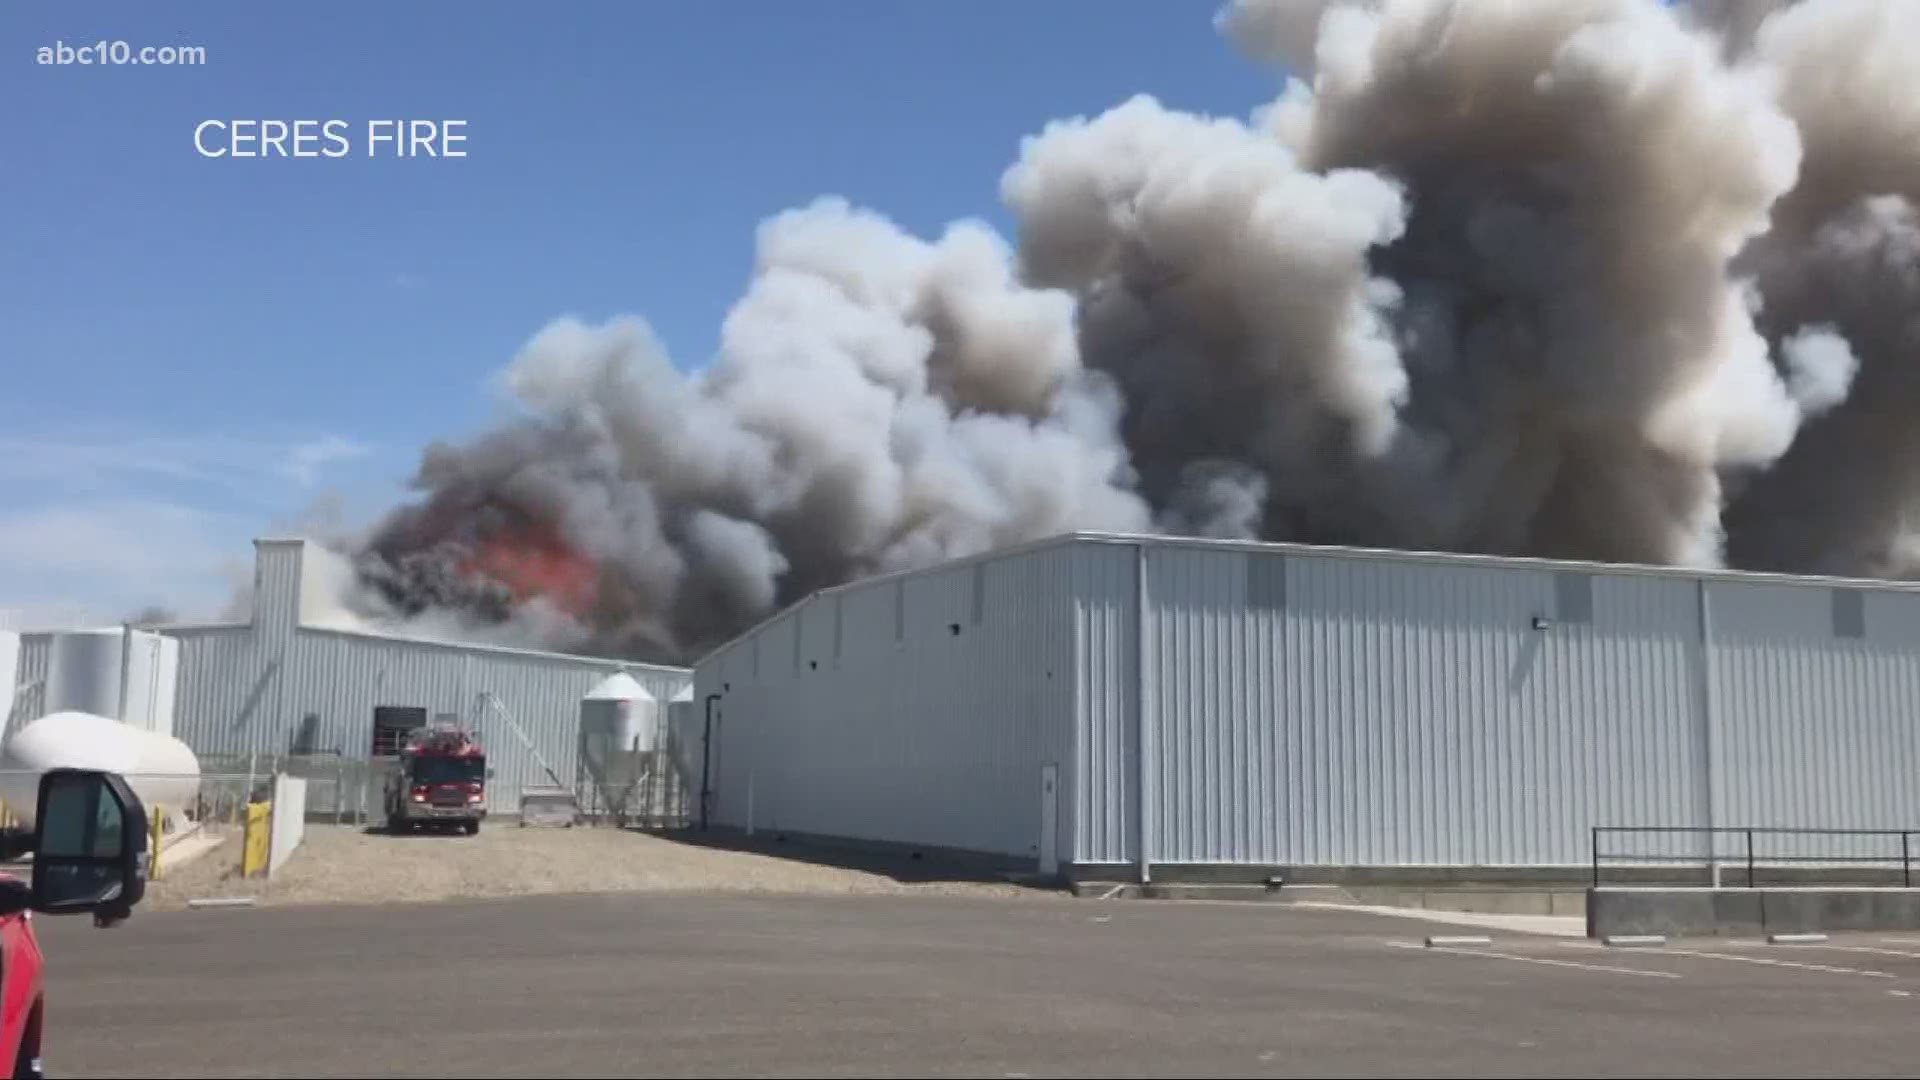 The Keyes Fire Protection District says every chicken in the building was lost to the fire.